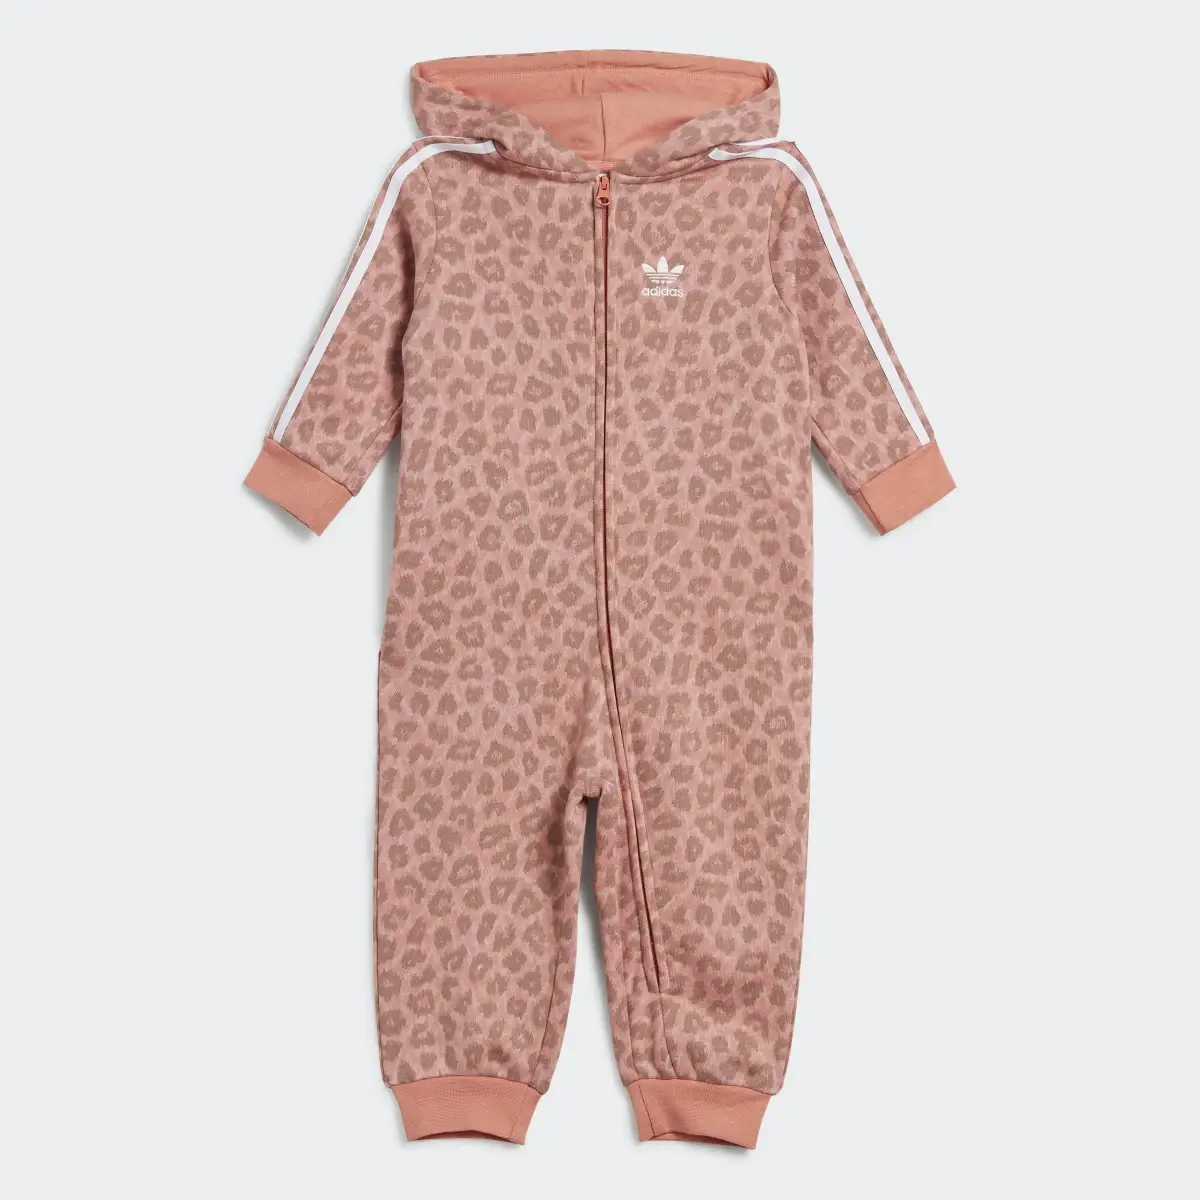 Adidas Animal Allover Print Hooded Bodysuit with Ears. 2